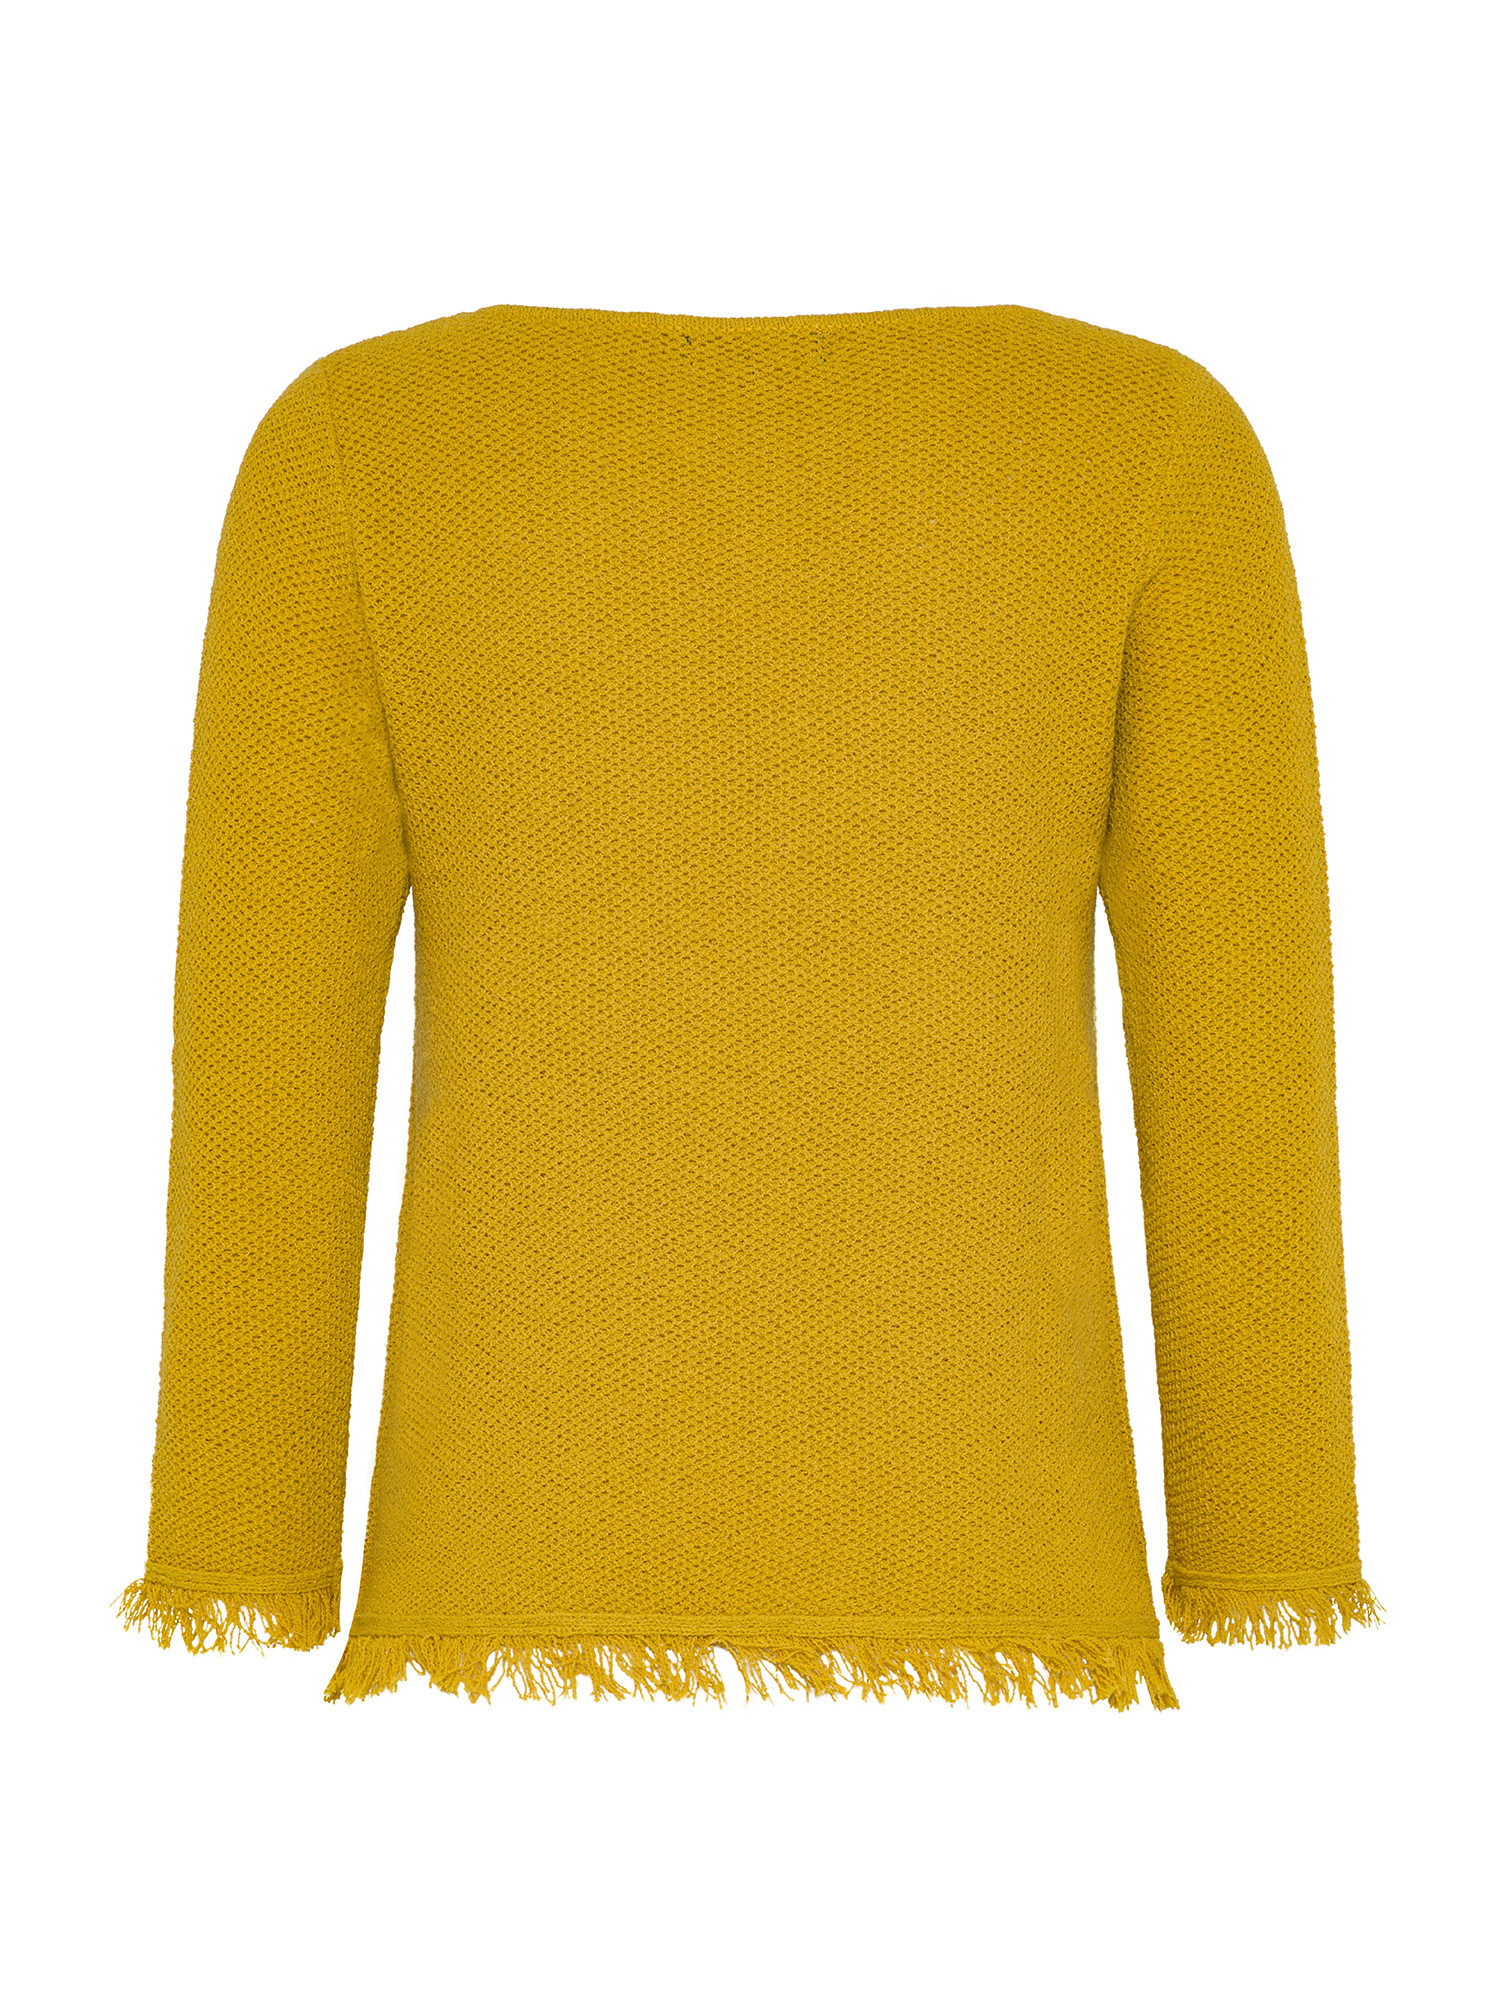 Koan - Pullover con frangette, Giallo ocra, large image number 1